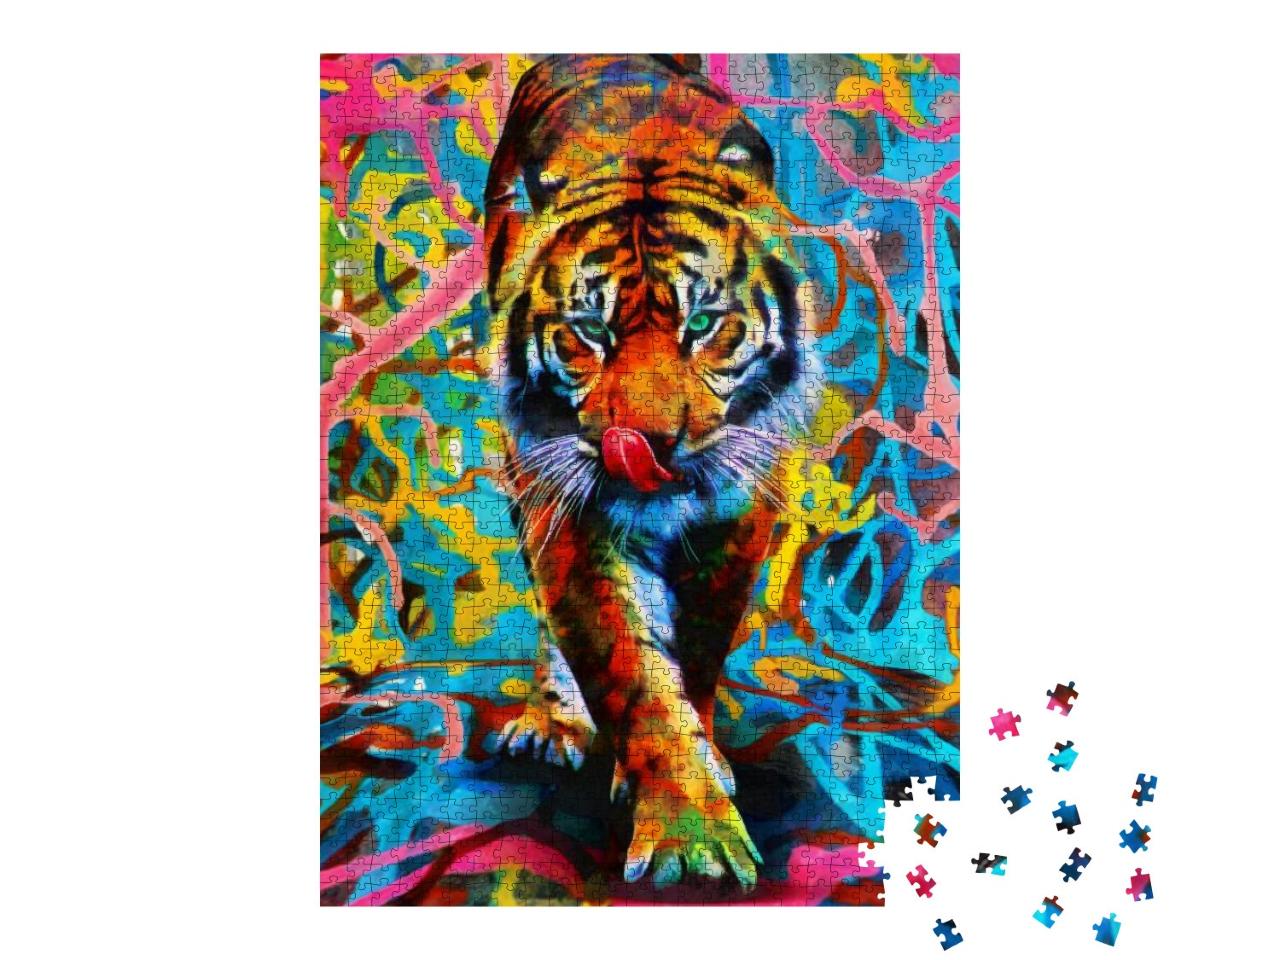 Modern Oil Painting of Tiger, Artist Collection of Animal... Jigsaw Puzzle with 1000 pieces